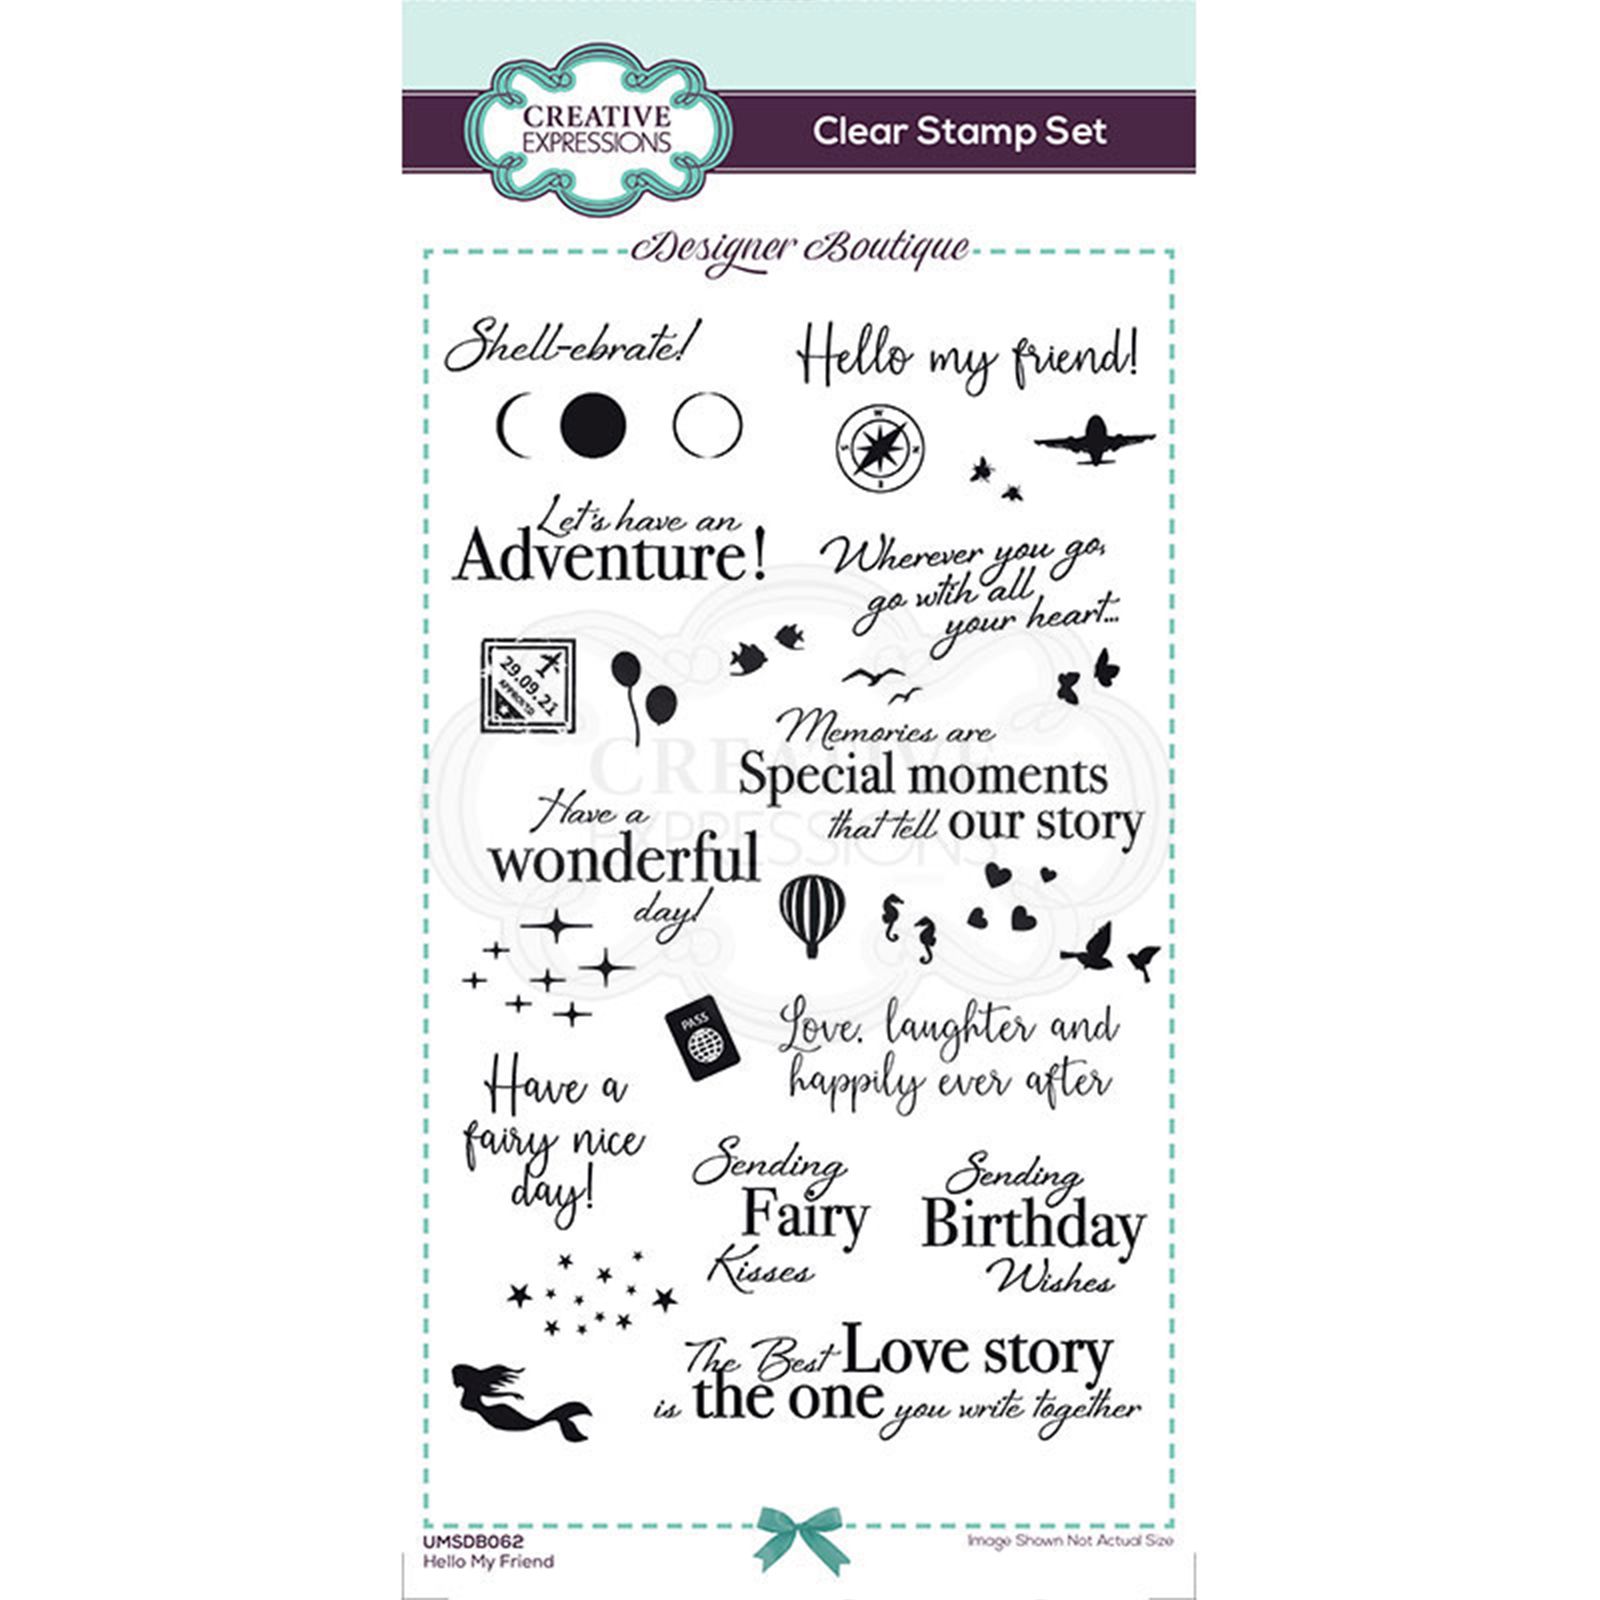 Creative Expressions • Designer boutique collection Clear stamp set Hello my friend